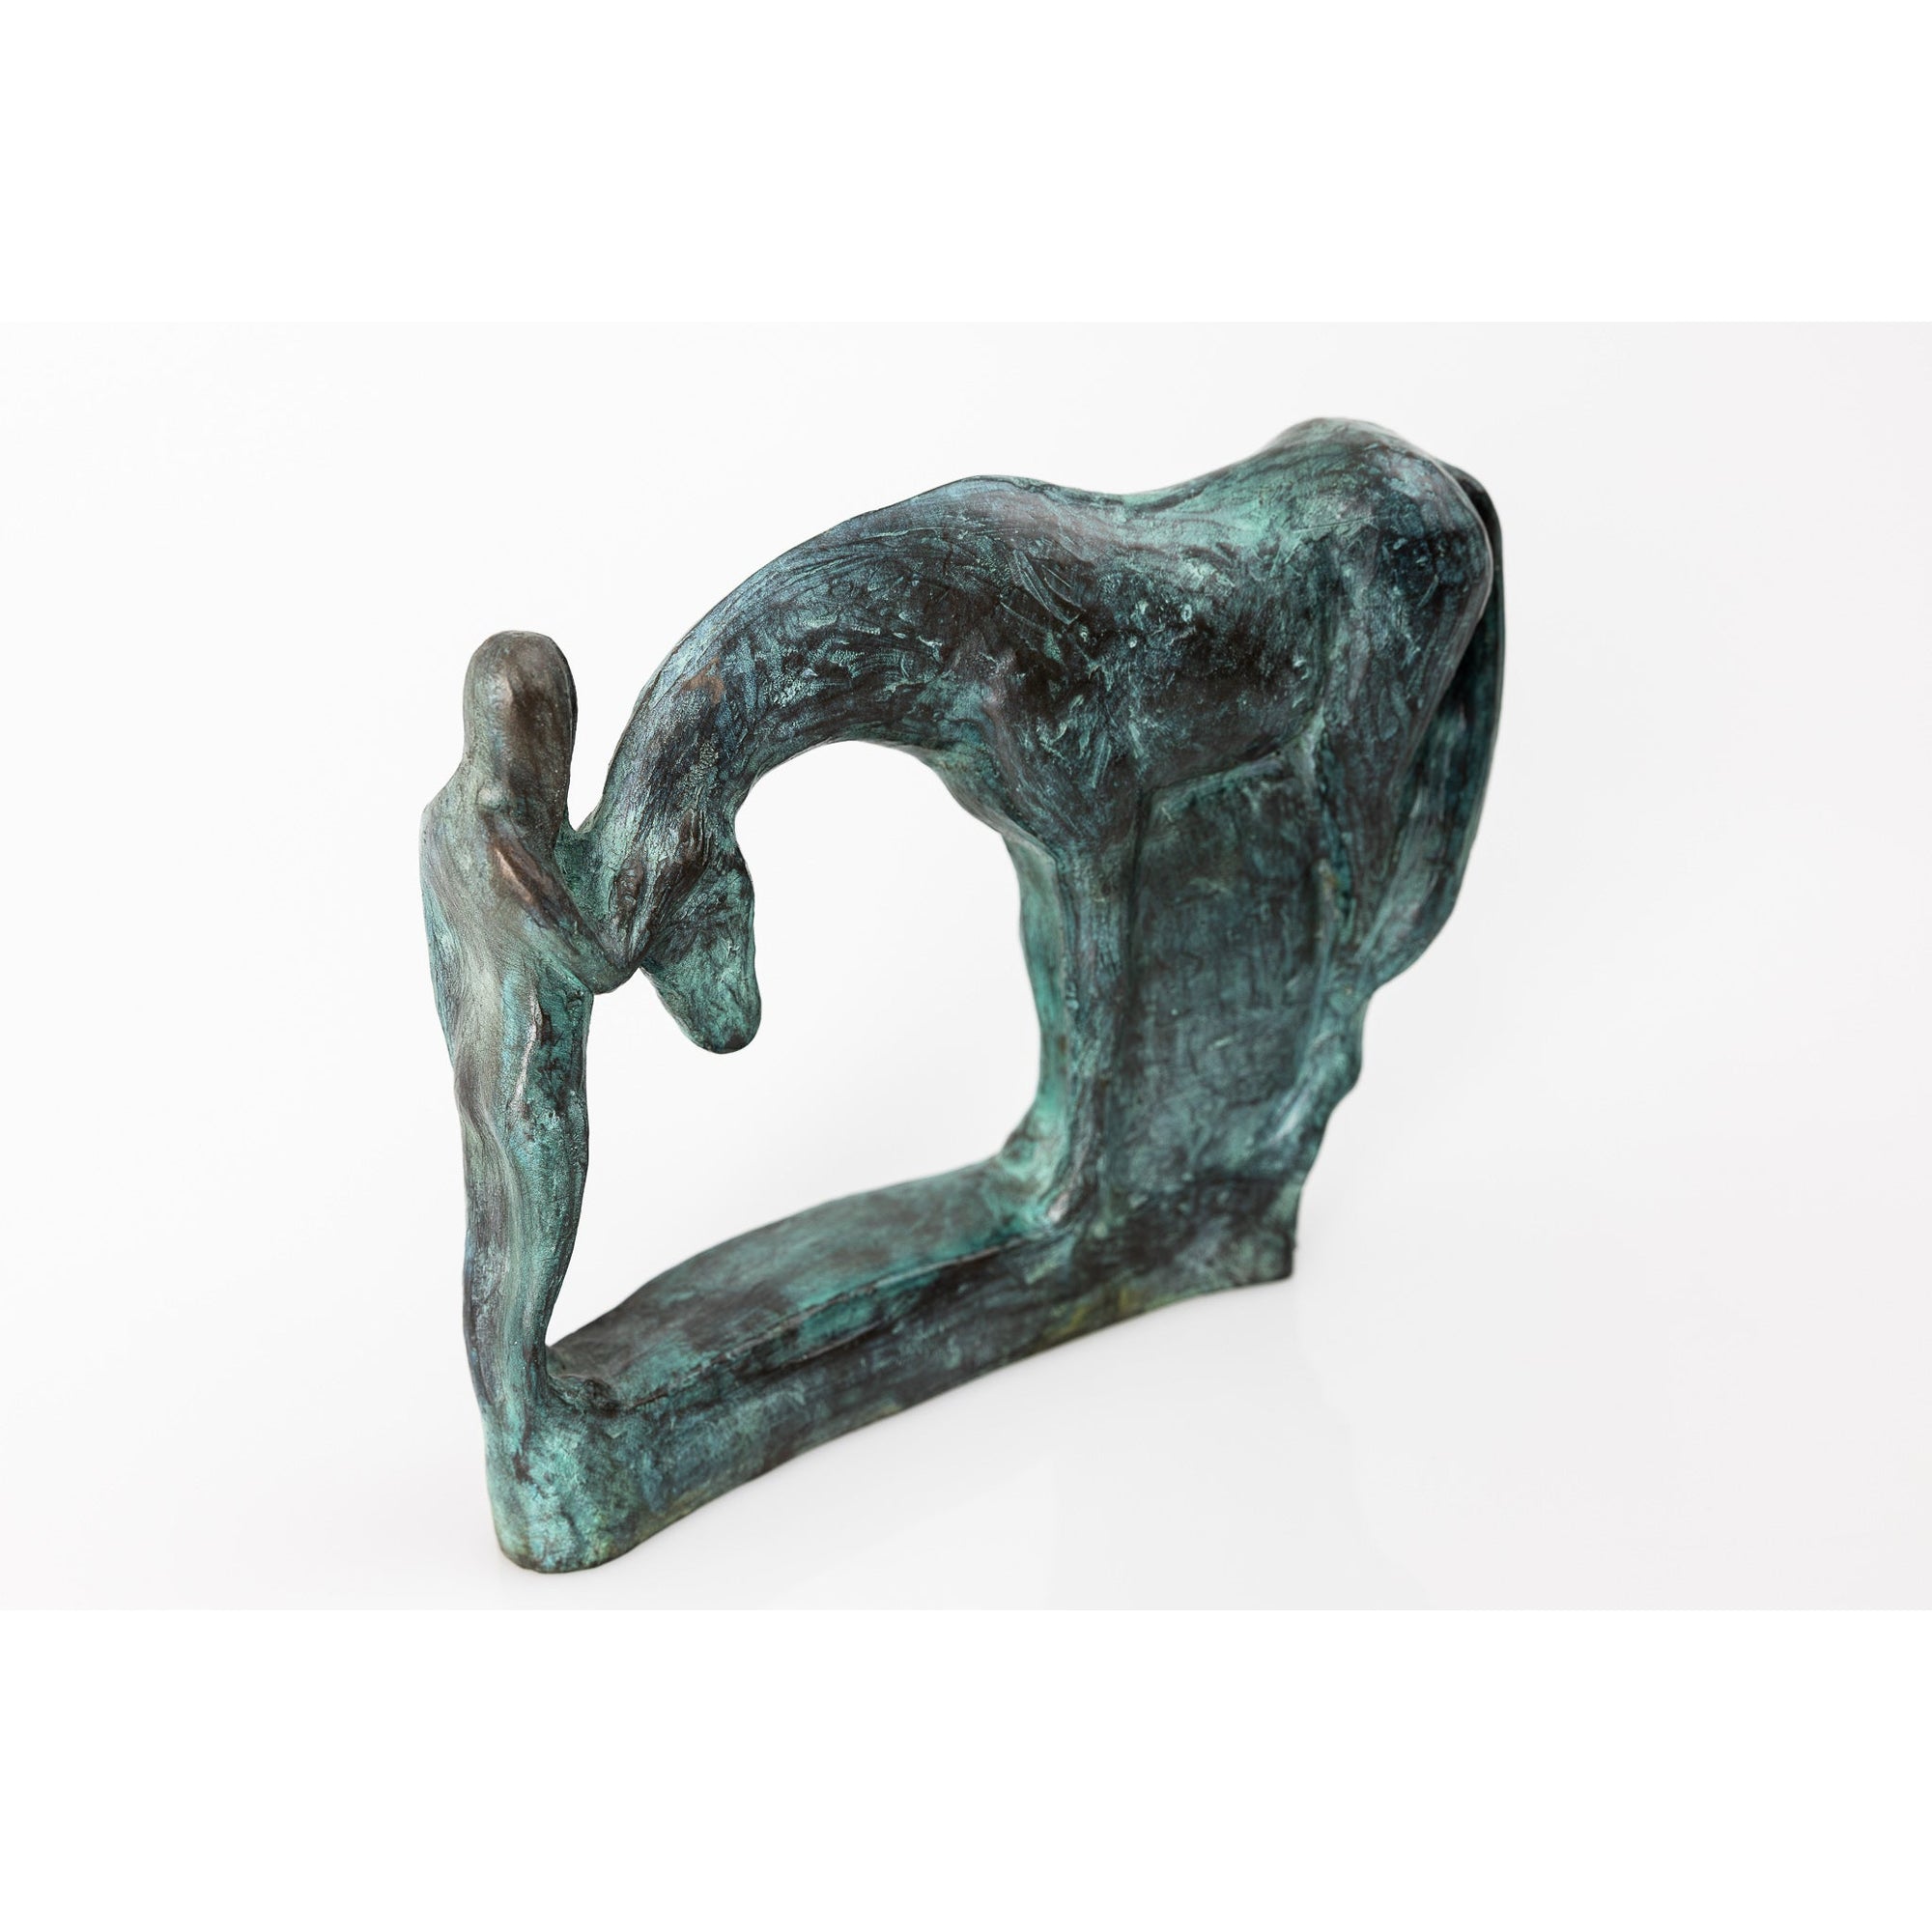 'Standing' sculpture by Sophie Howard, available at Padstow Gallery, Cornwall